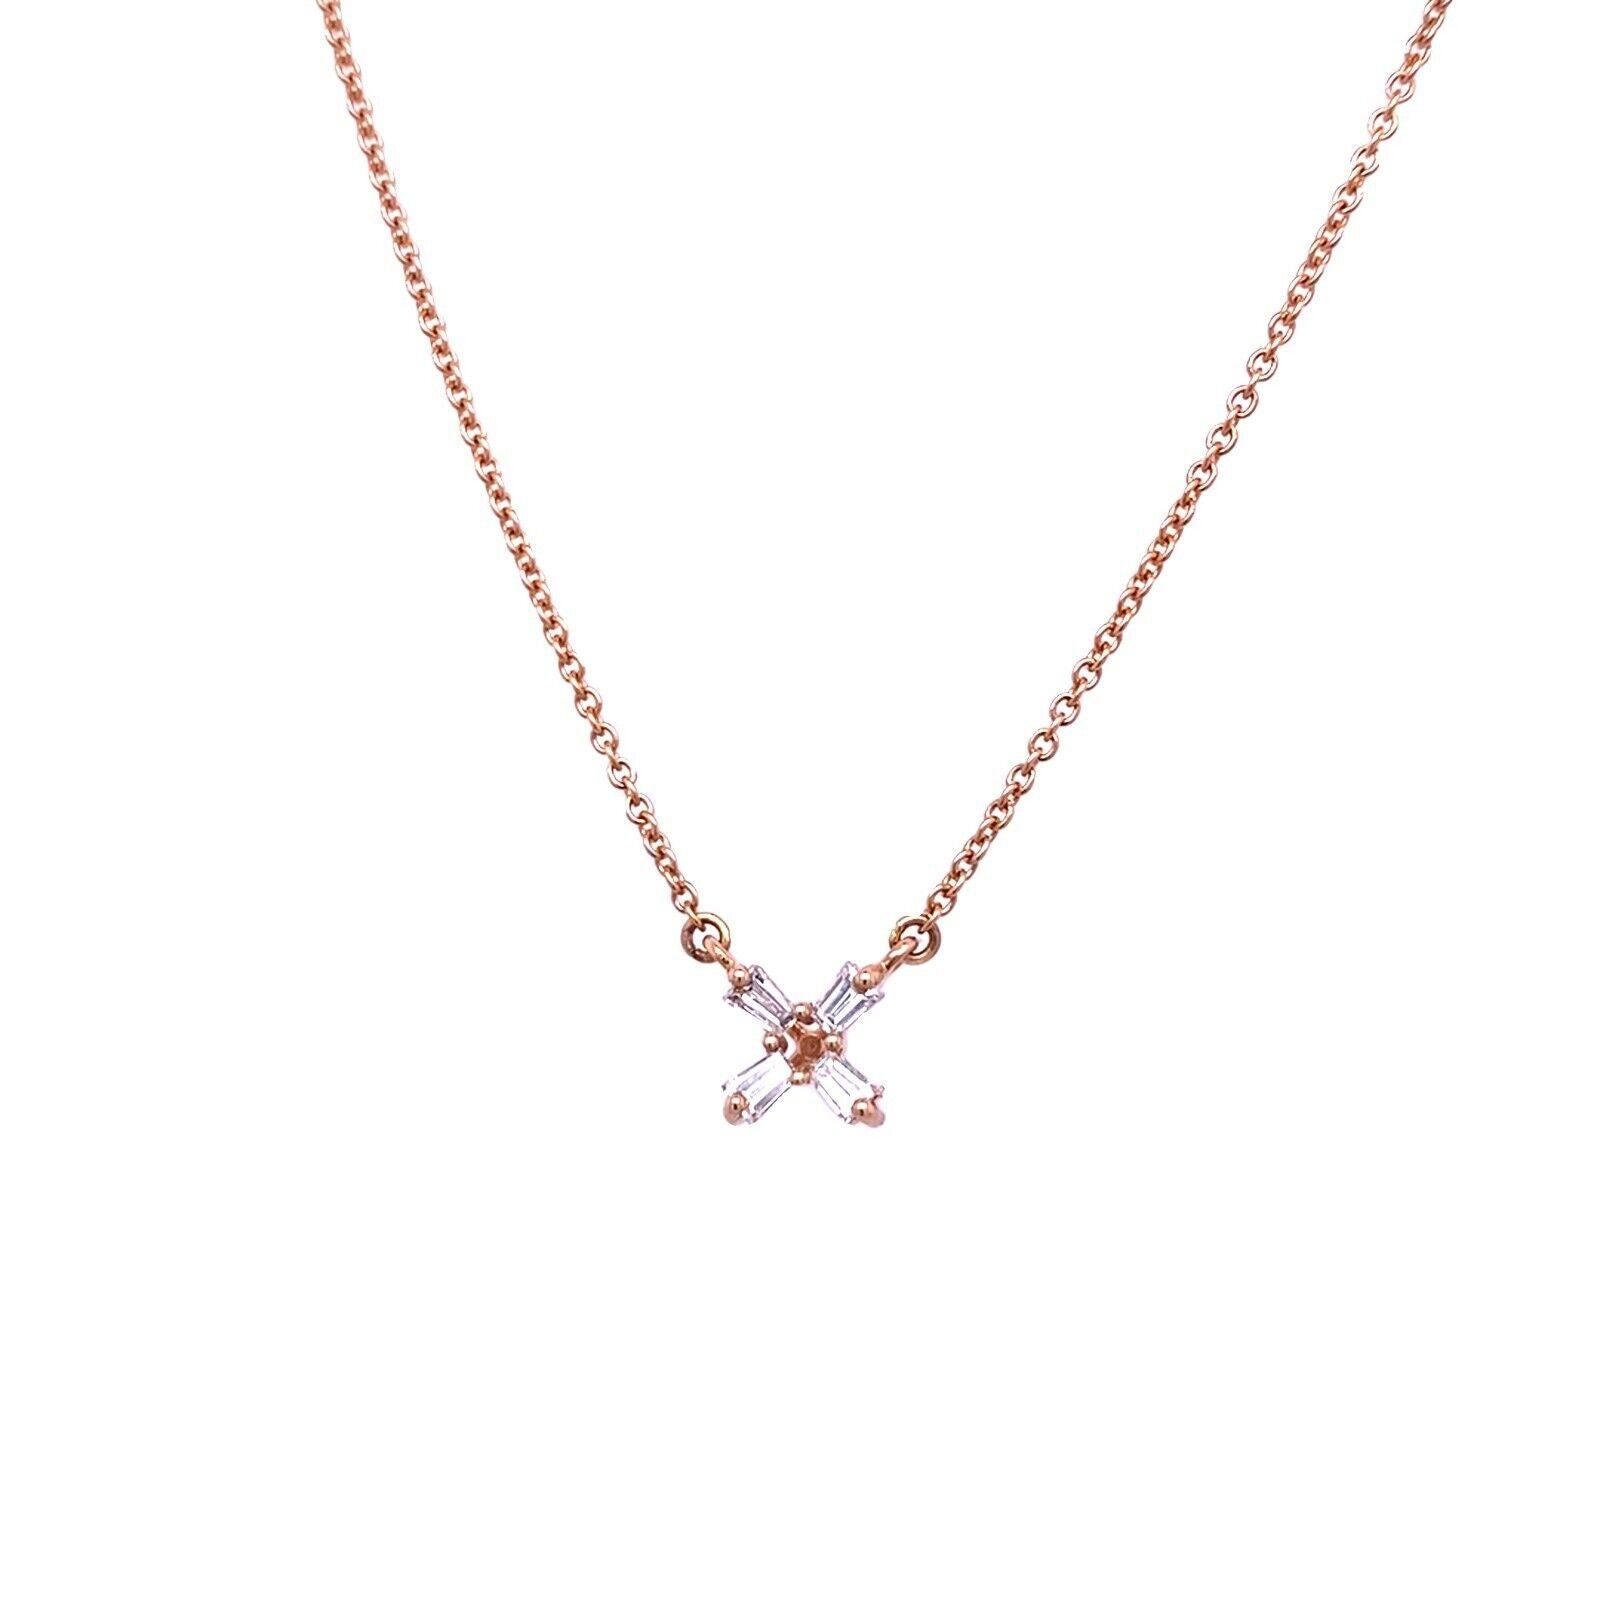 Fine Quality 0.23ct 4 F VS Baguette-Shape Diamond Pendant Set in 18ct Rose Gold

This gorgeous flower pendant is crafted in 18ct rose gold and features a total of 4 baguette-shaped diamonds. These diamonds have a total weight of 0.23ct. Its